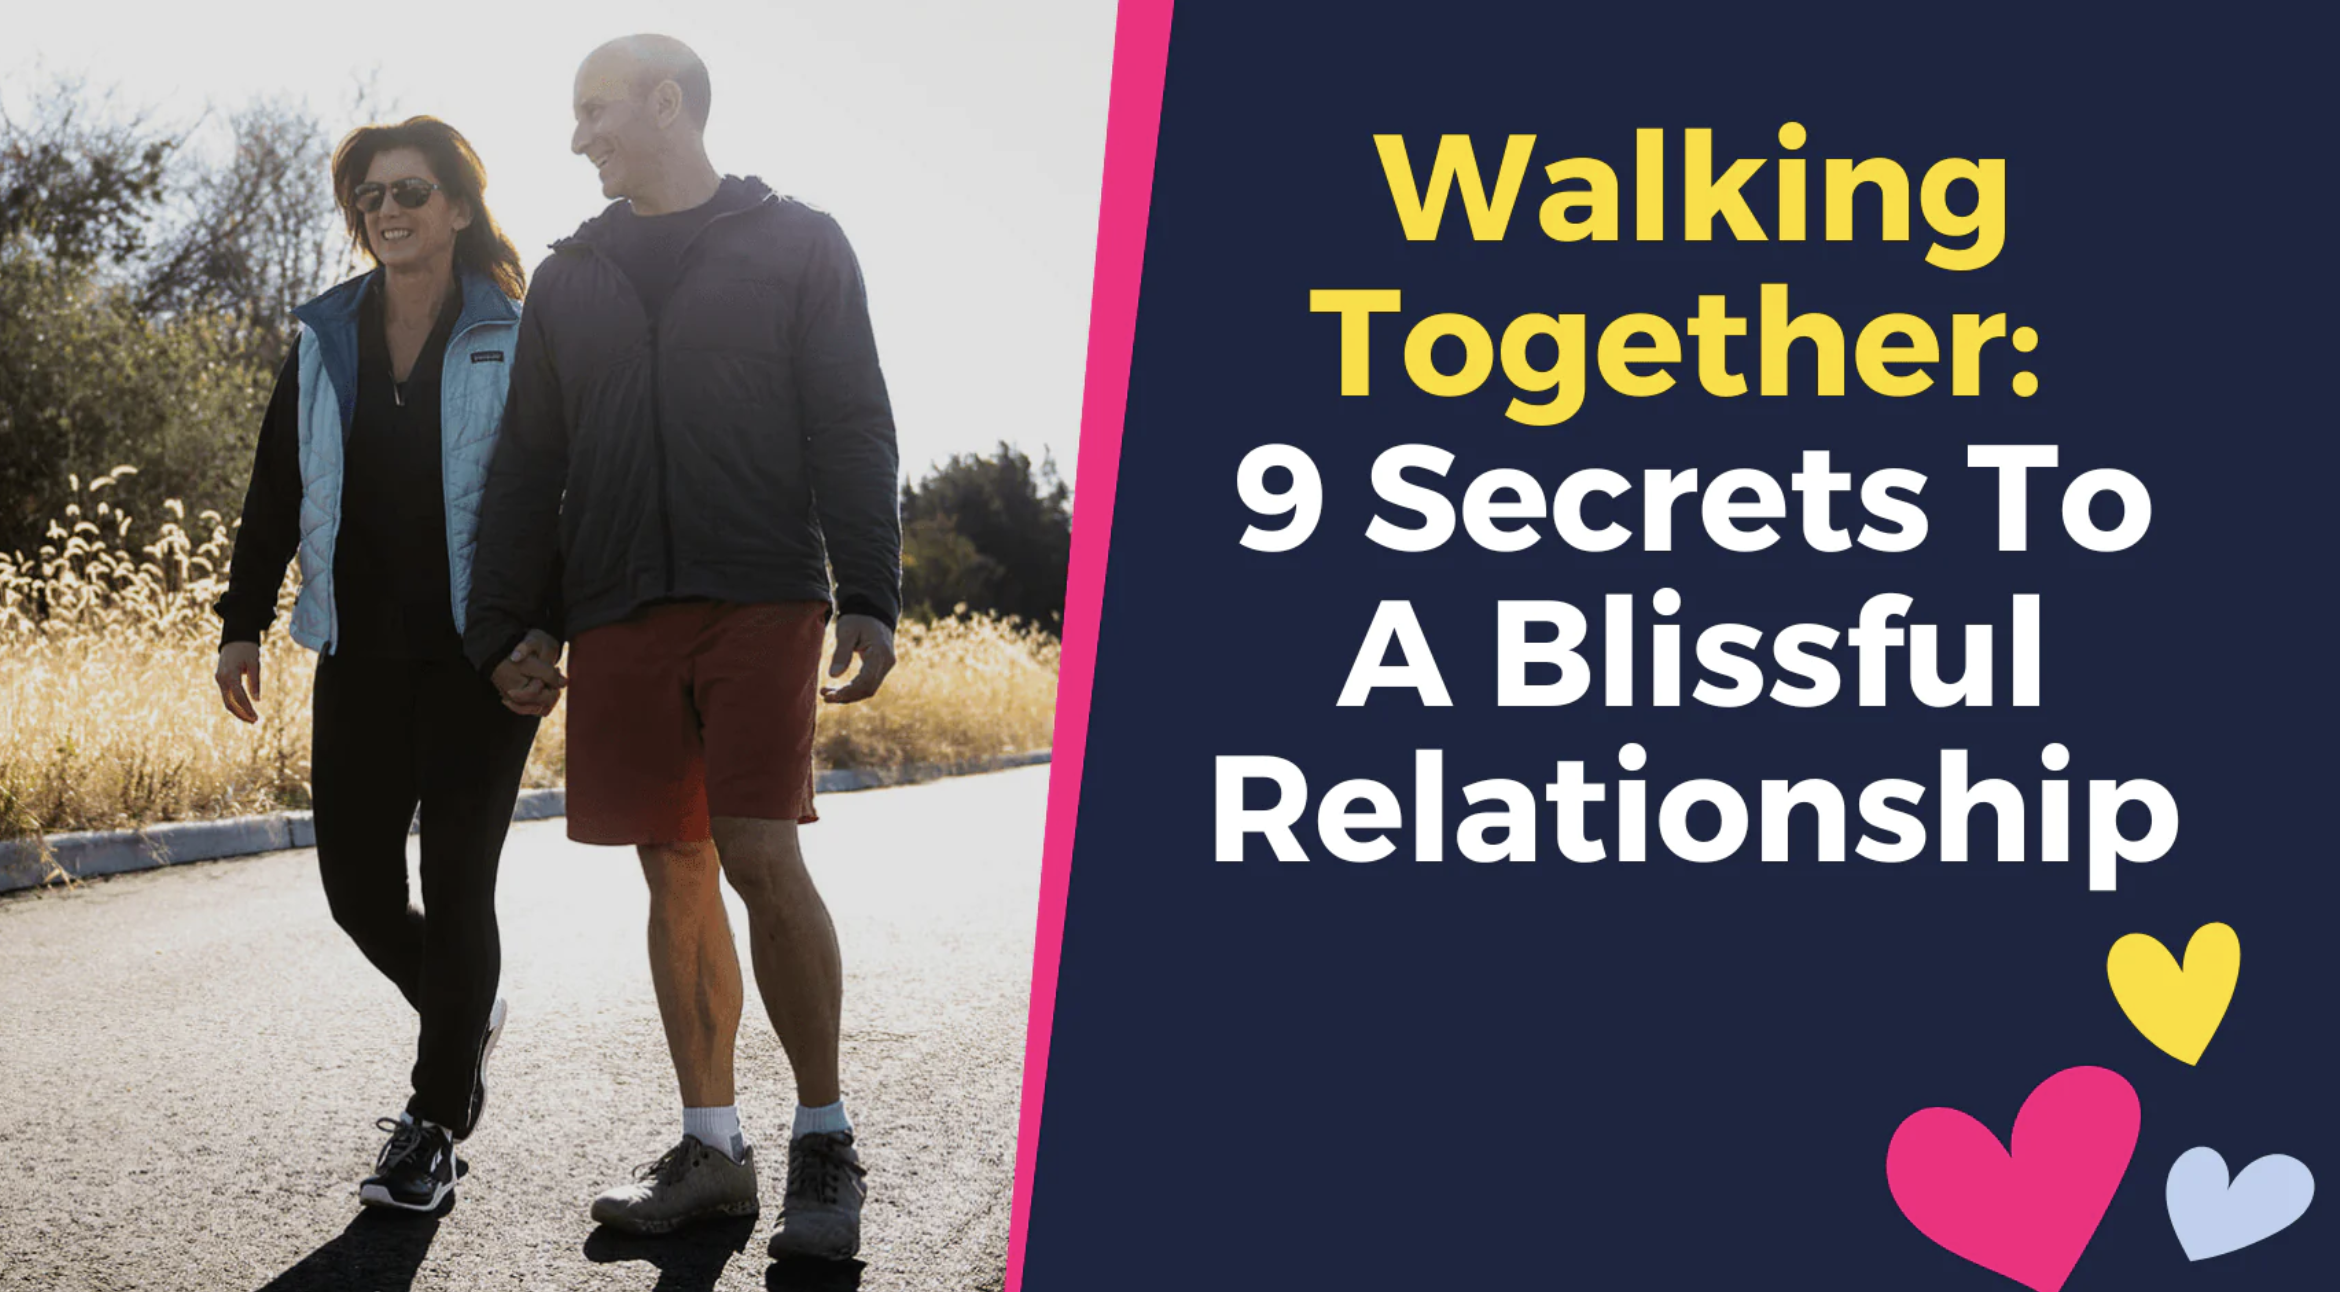 Walking Together: 9 Secrets To A Blissful Relationship